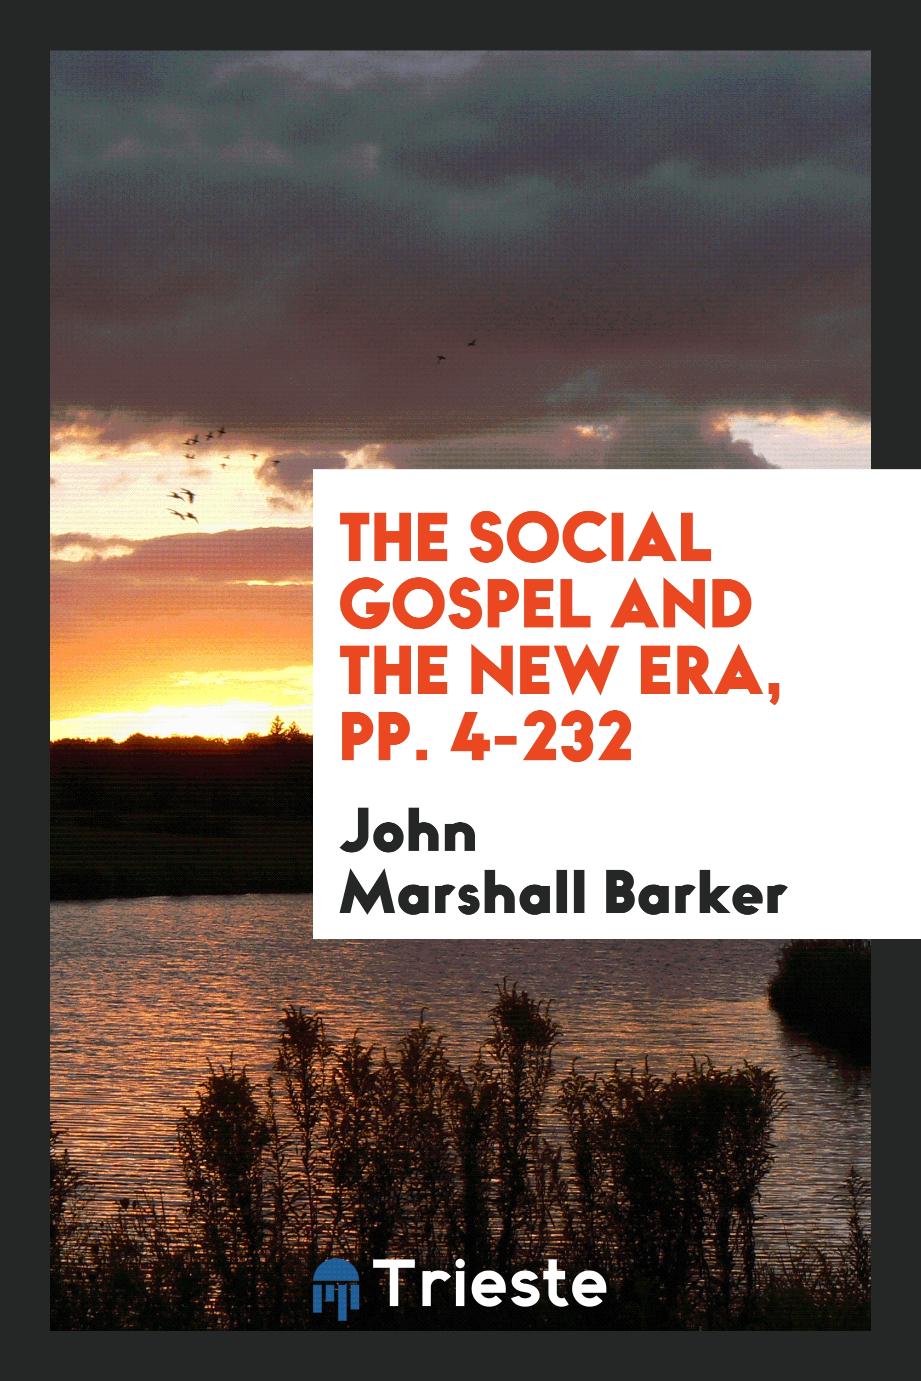 The Social Gospel and the New Era, pp. 4-232